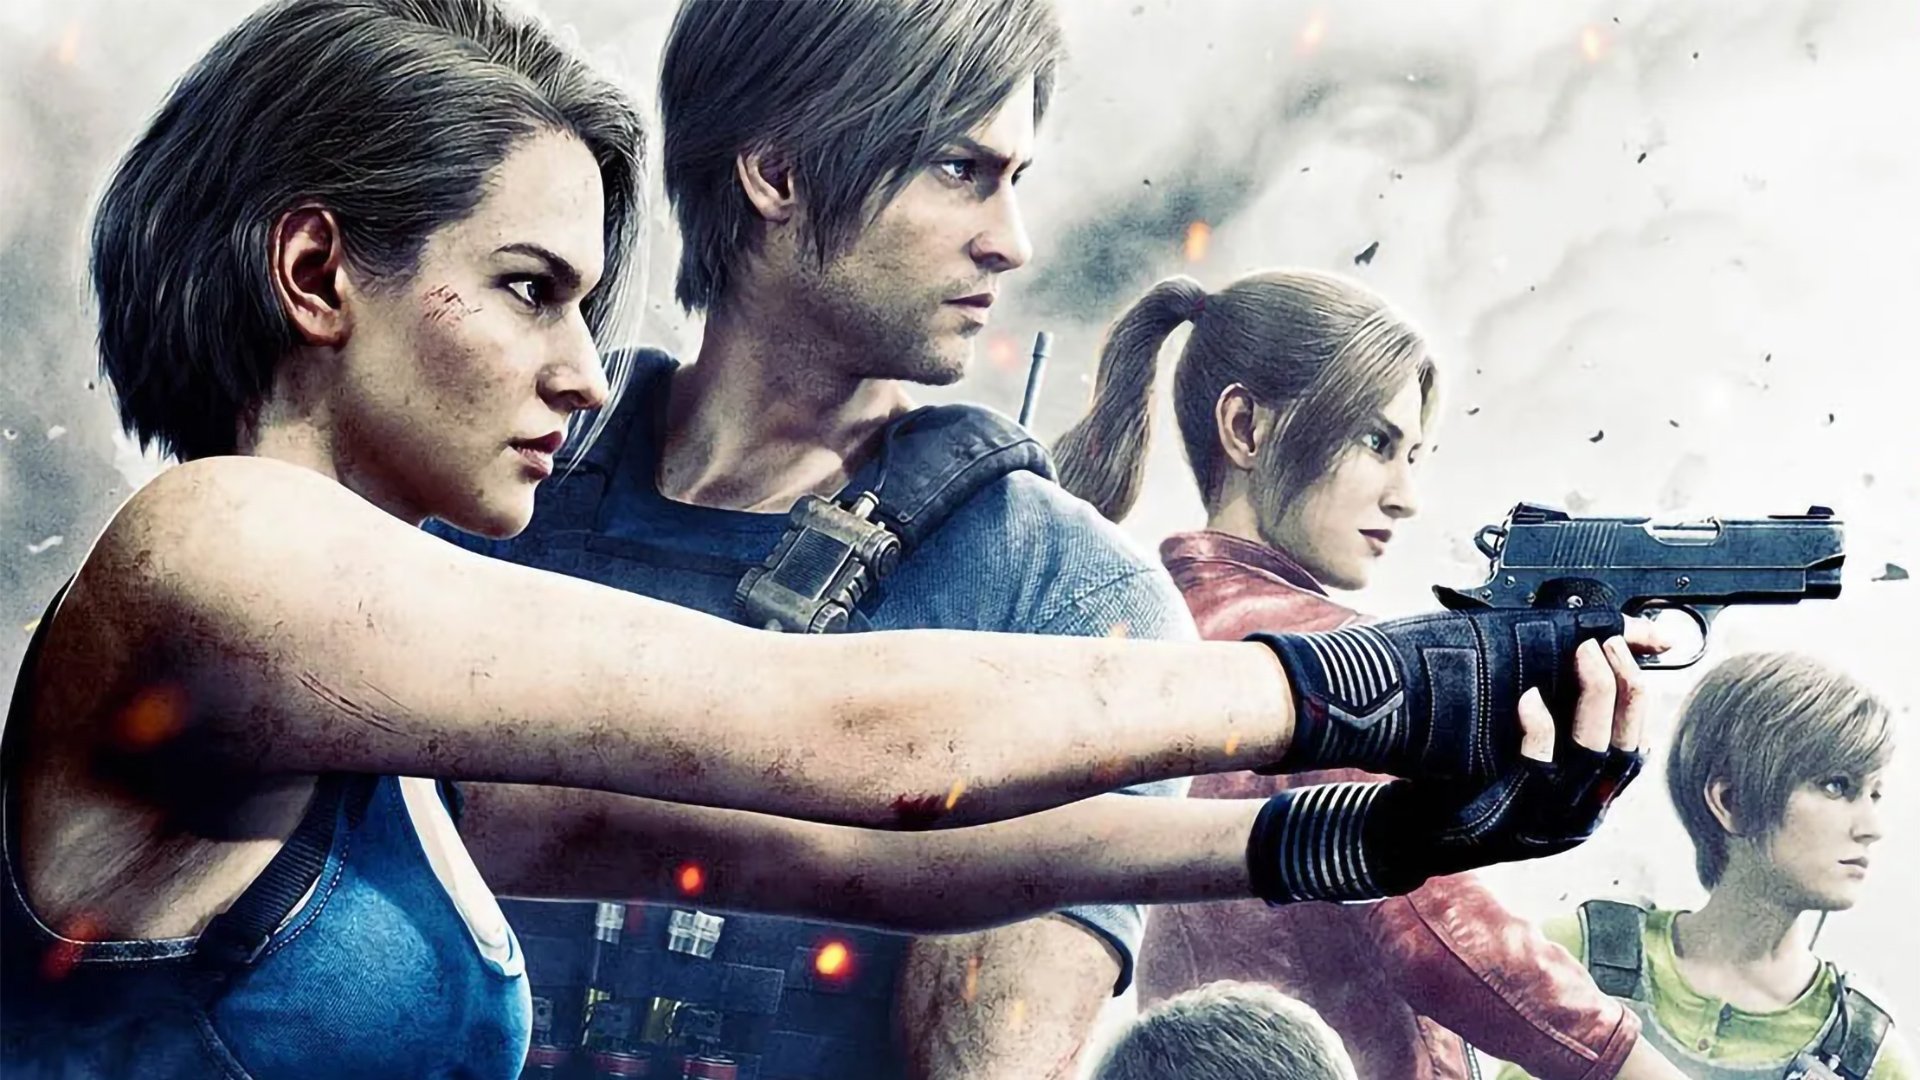 Evil Comes Home in the New Trailer for Resident Evil: The Final Chapter